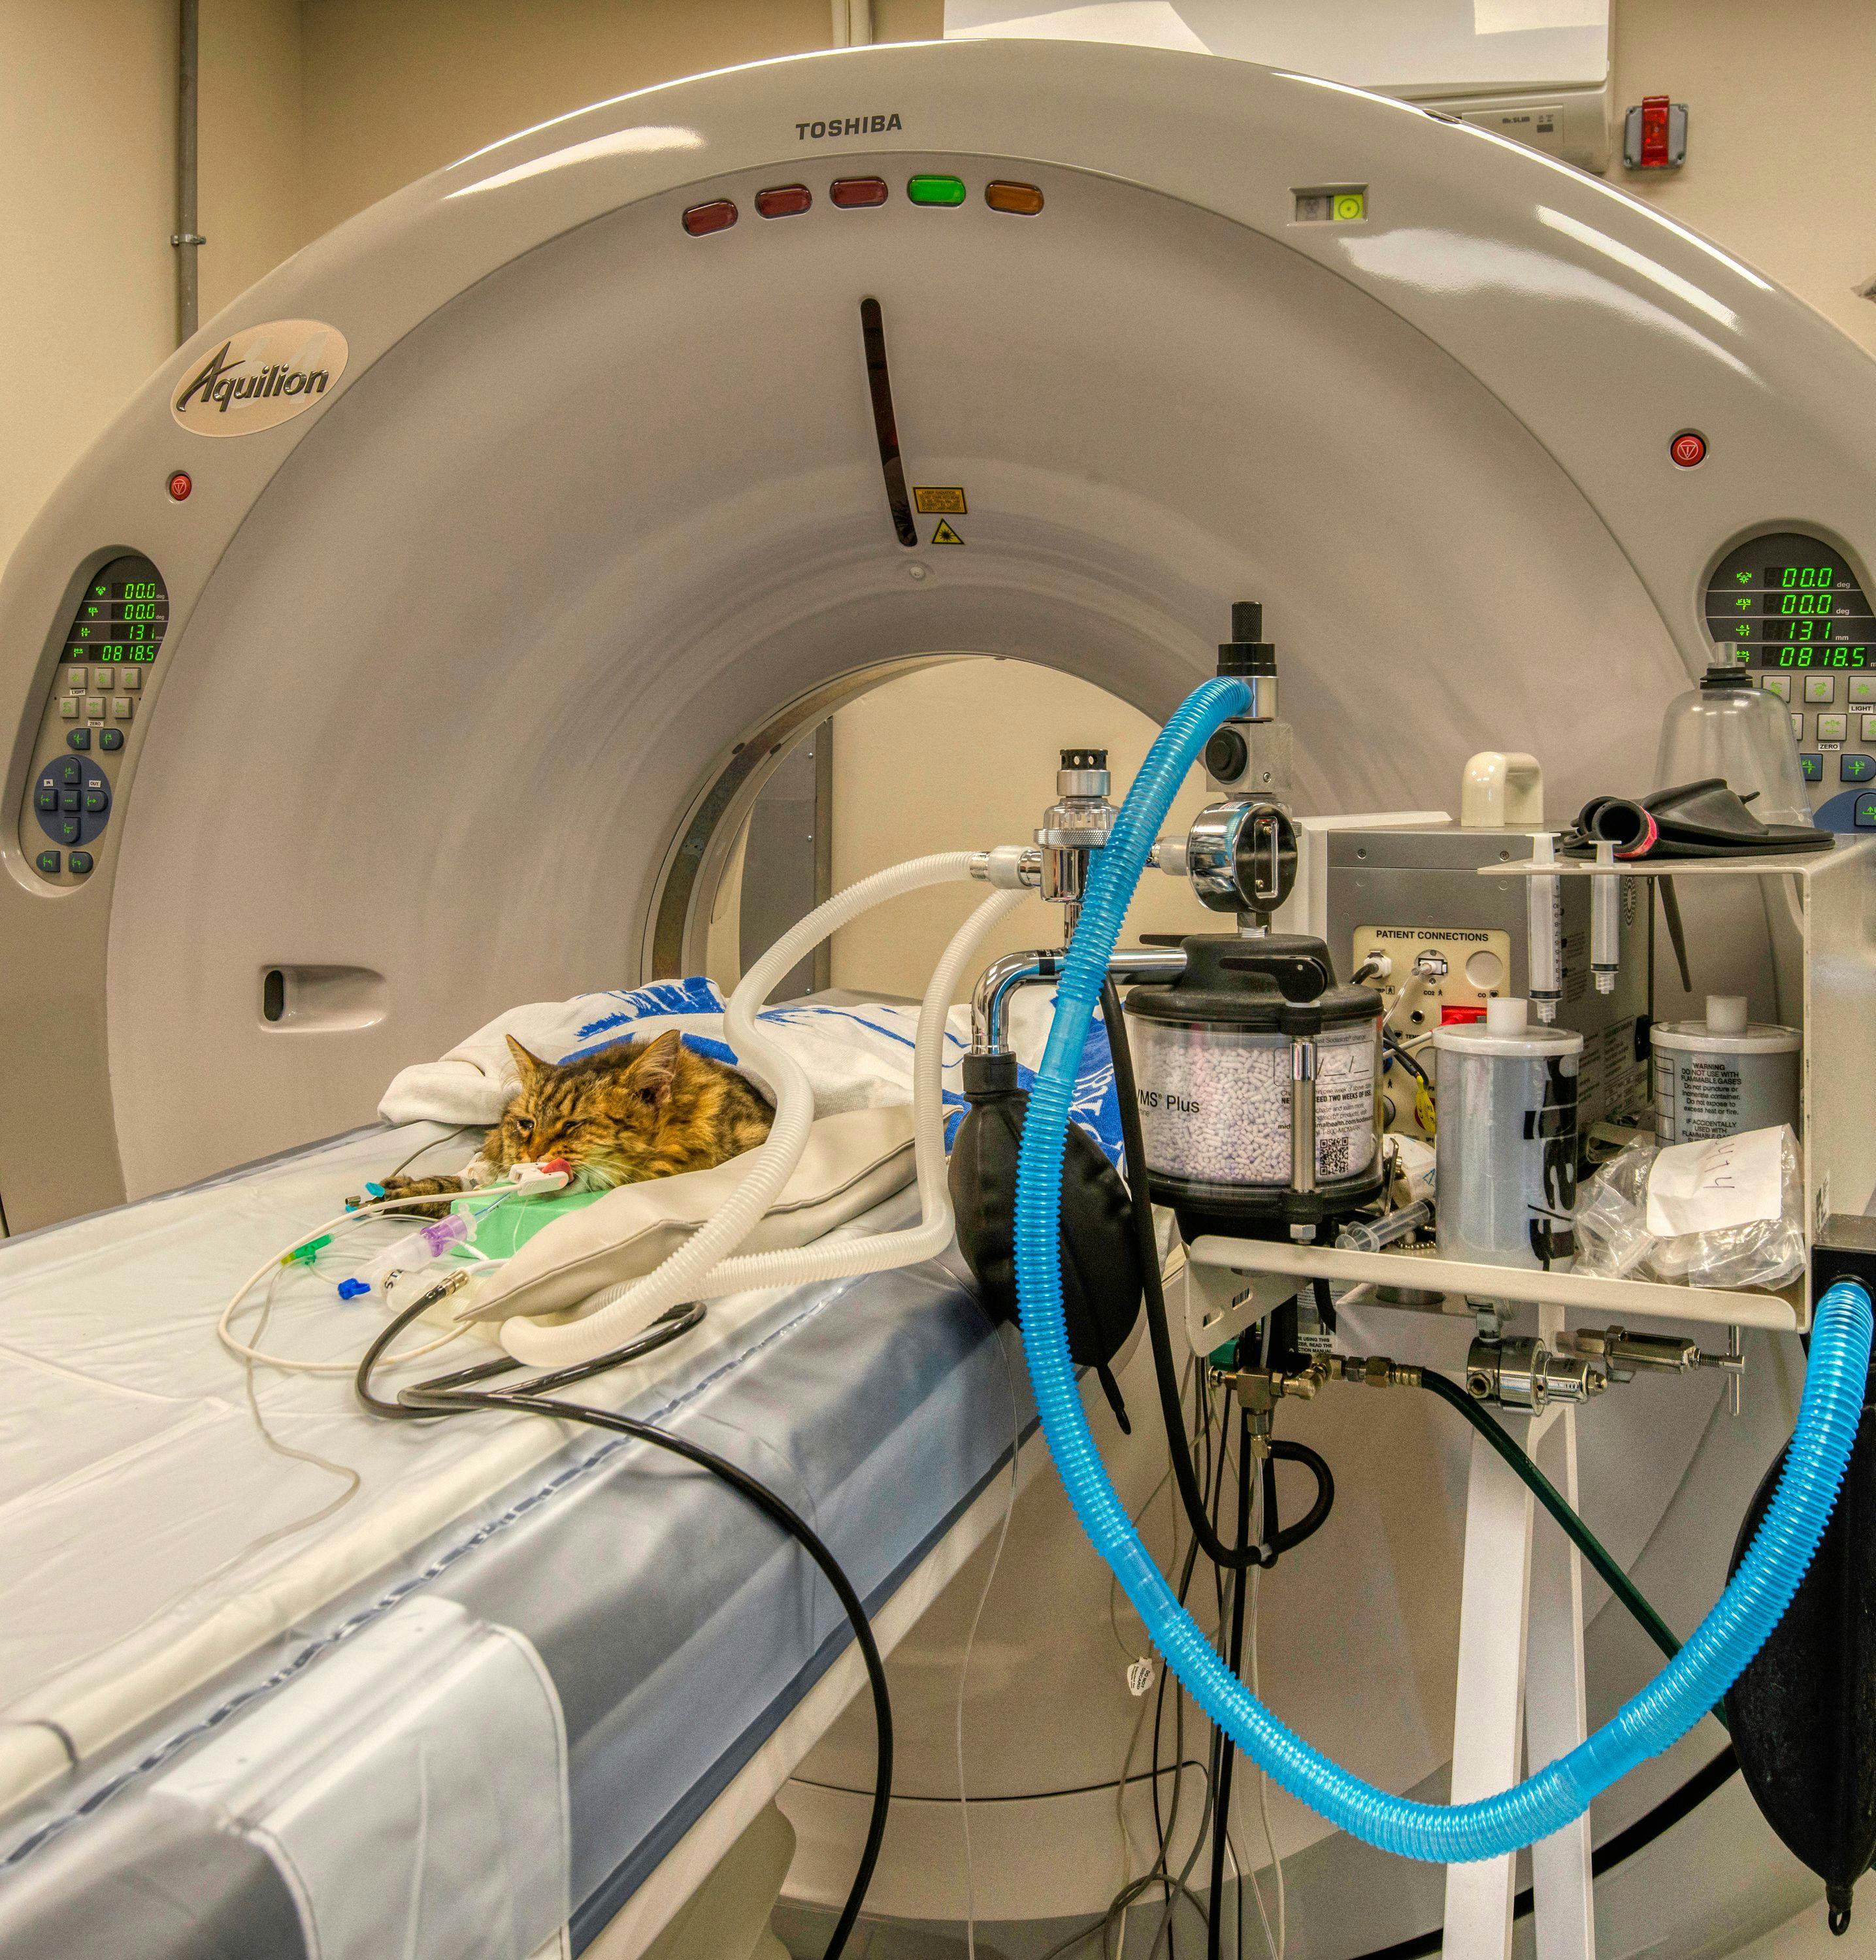 Although the hospital tripled in size, the doctors say it was a challenge to fit everything inside, especially with the large amount of space required for CT equipment and wide doors to install the machinery.